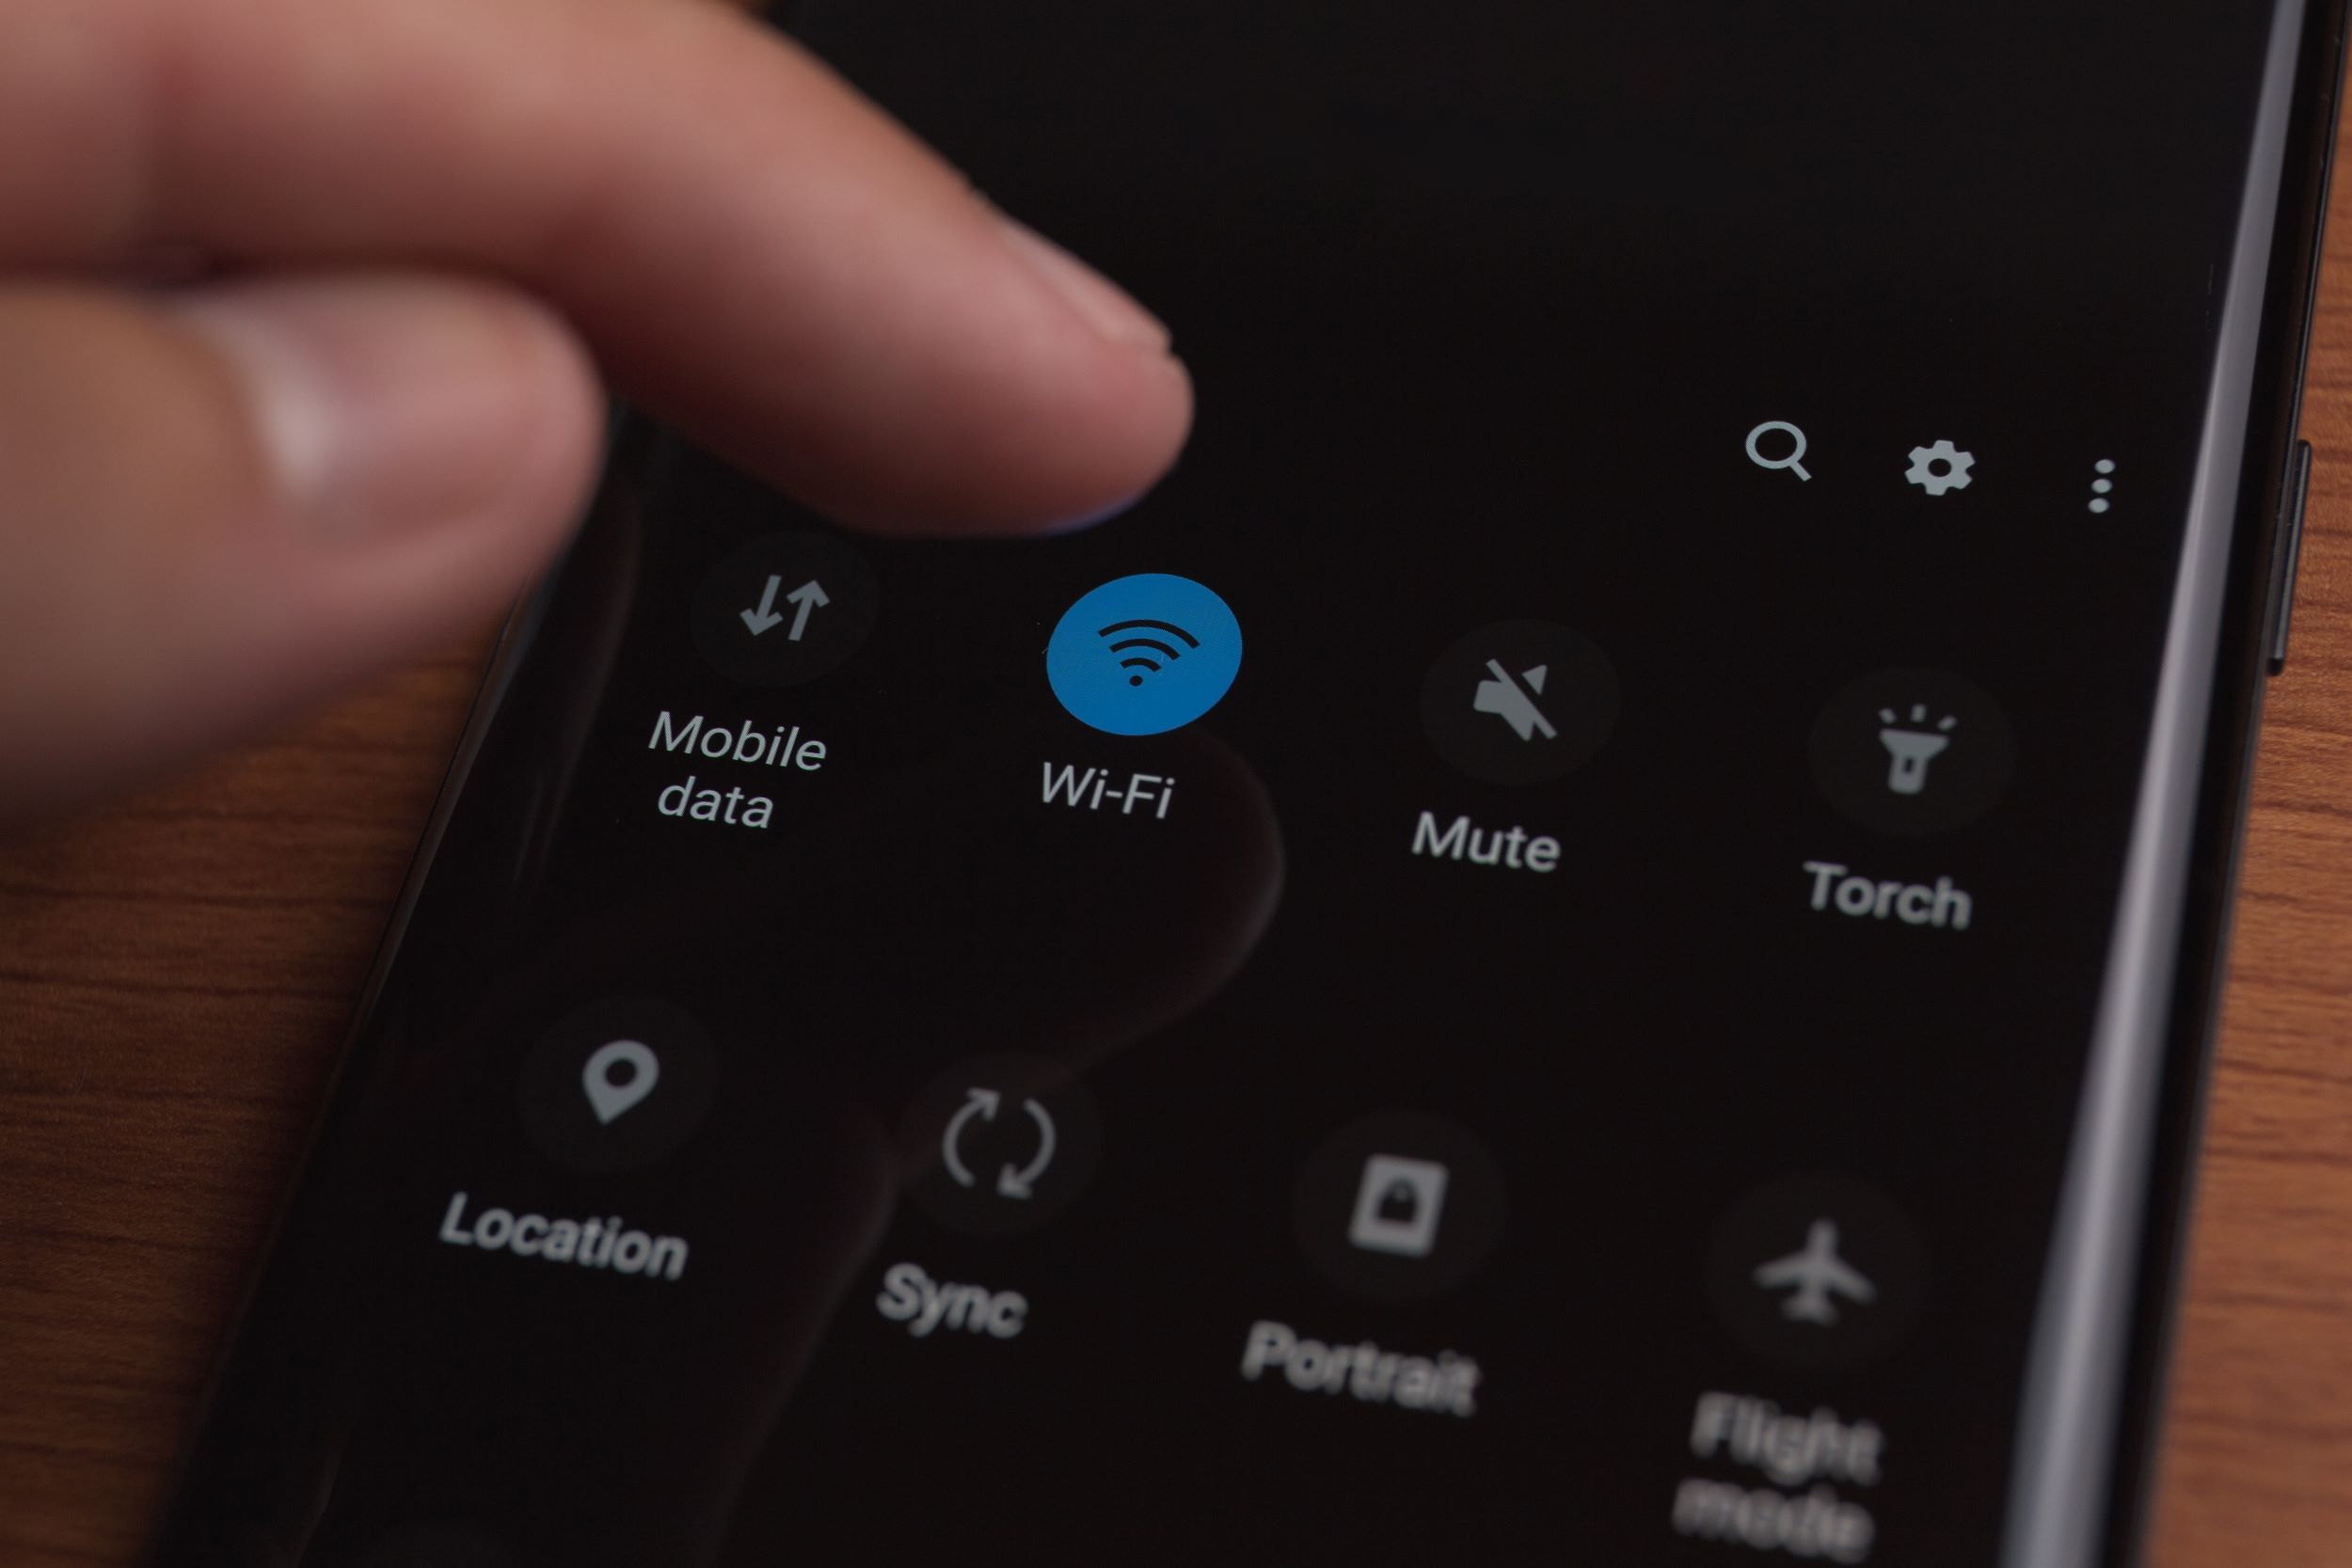 How to see your WiFi password on Android